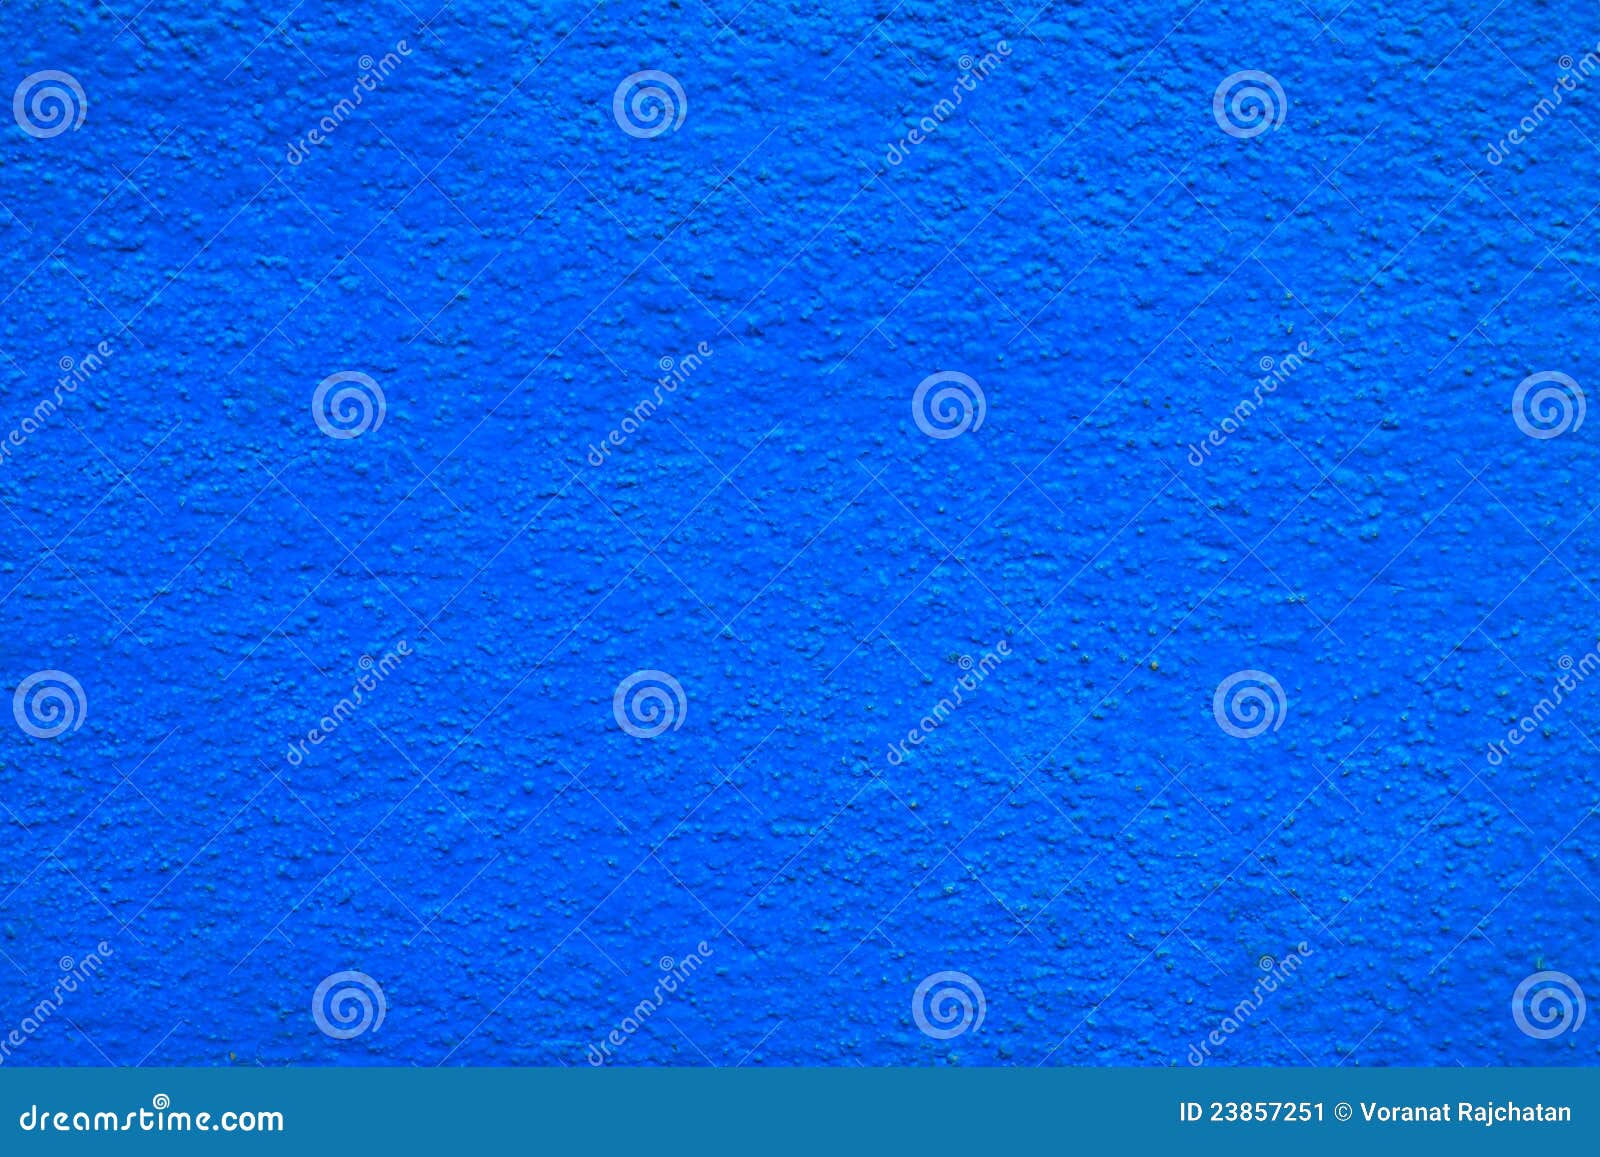 Blue wall stock image. Image of details, concrete, beautiful - 23857251